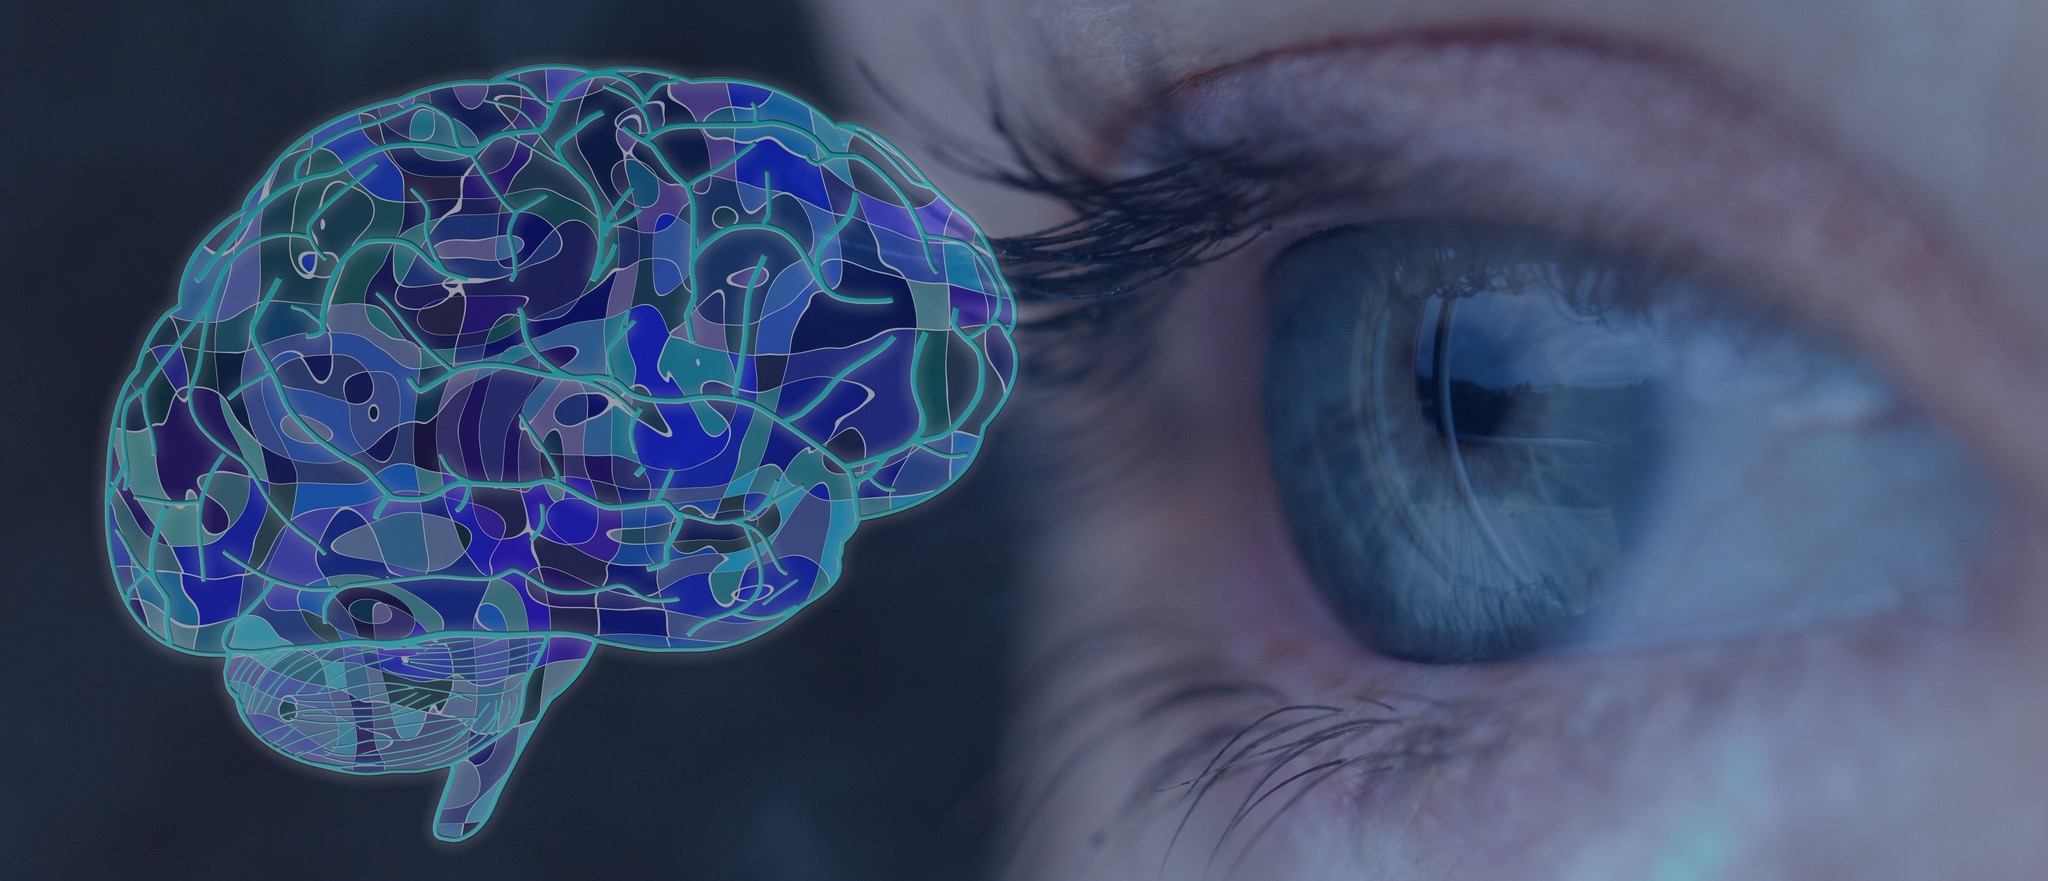 What Is Neuro-Ophthalmology? | Circle City Neuro-Ophthalmology